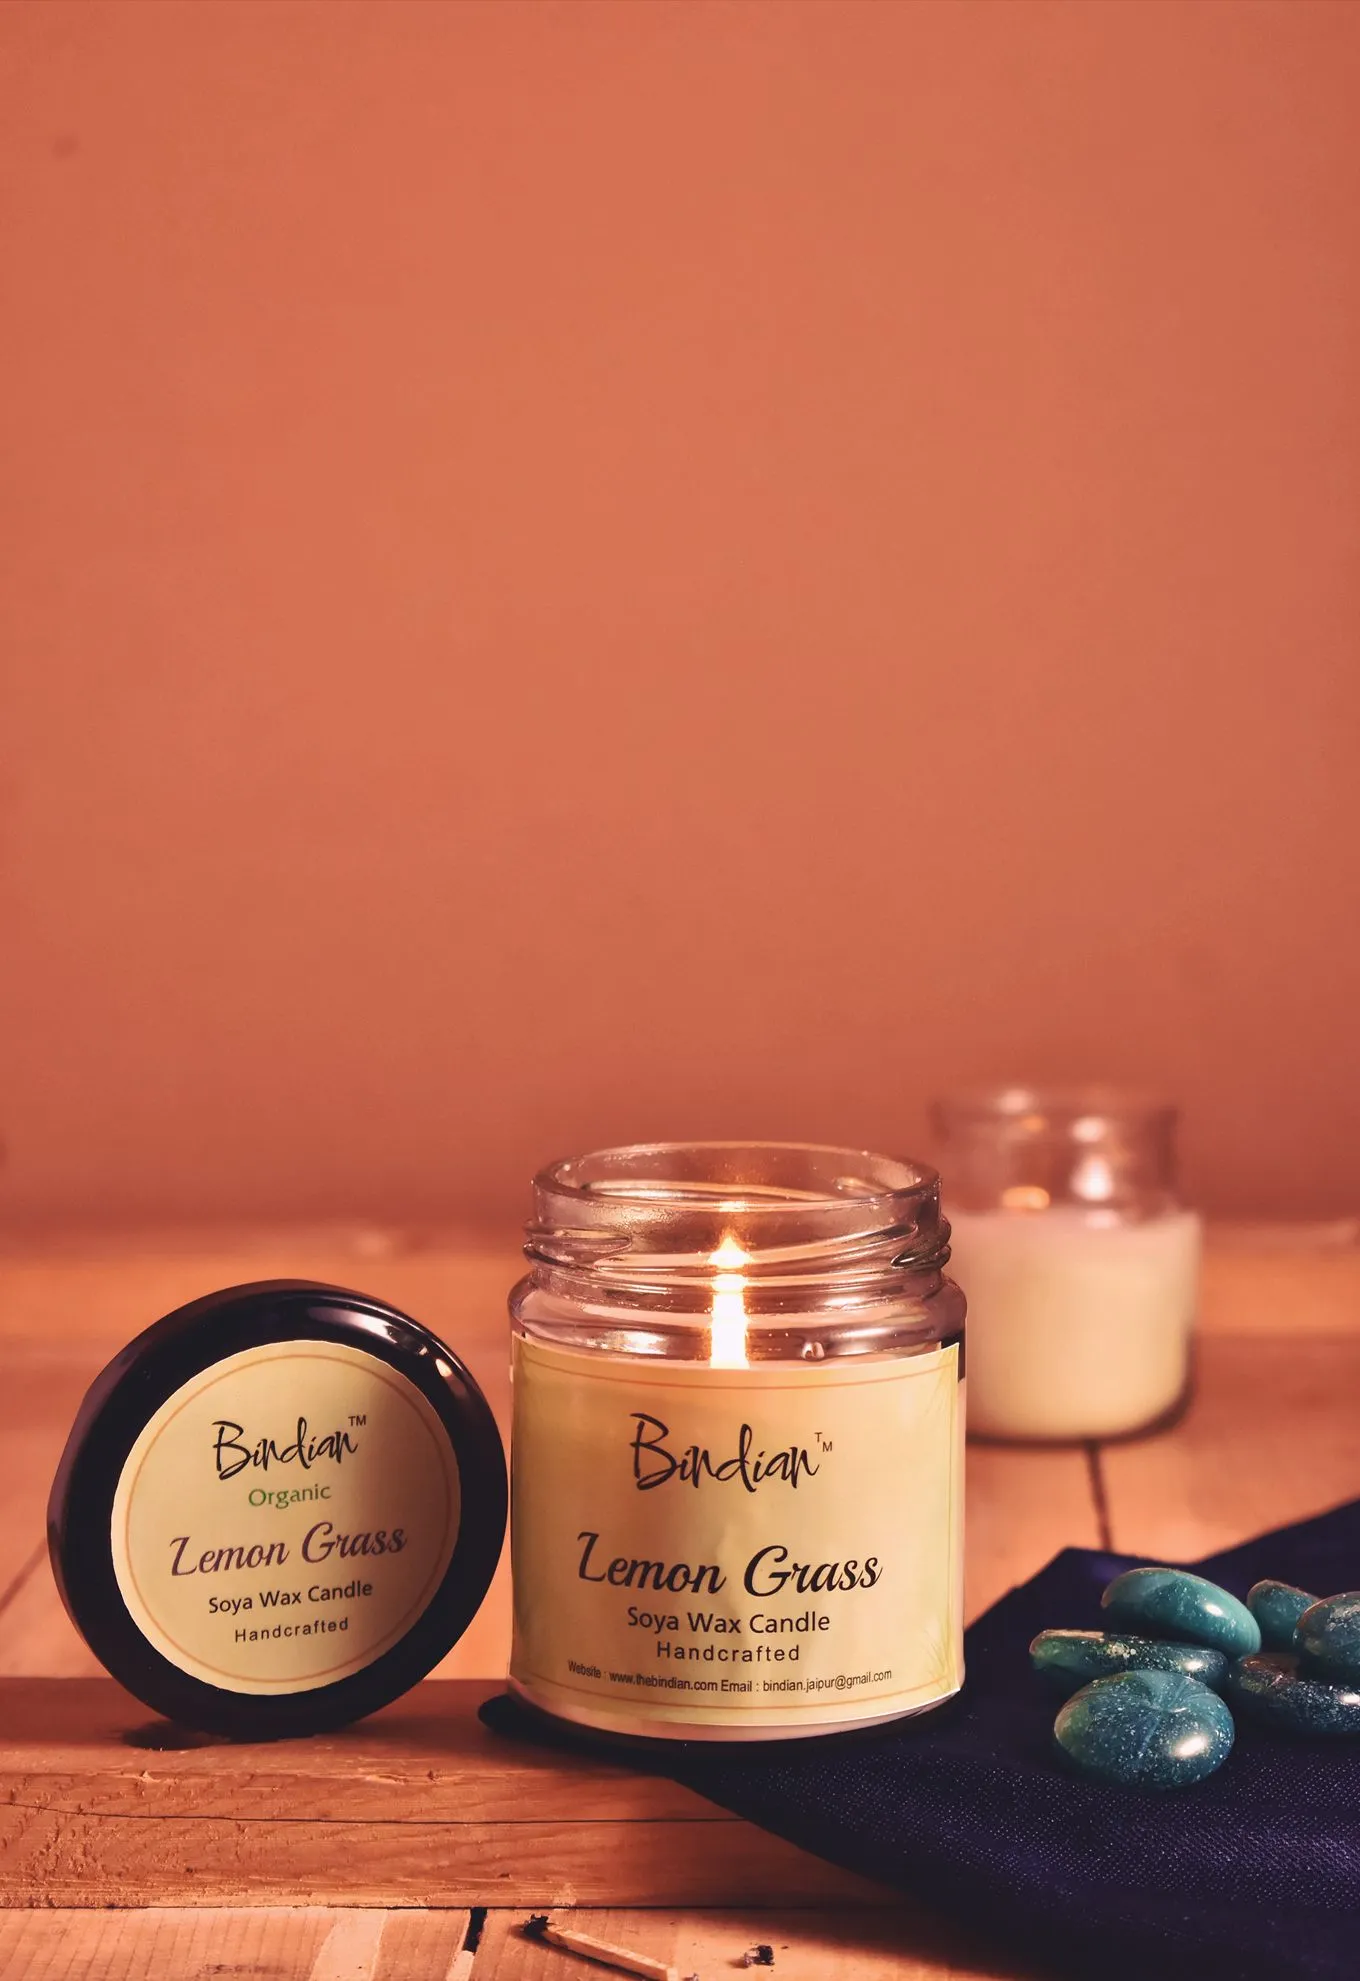 Lemon Grass Scented Candle, 24 Hours Long Burning Time